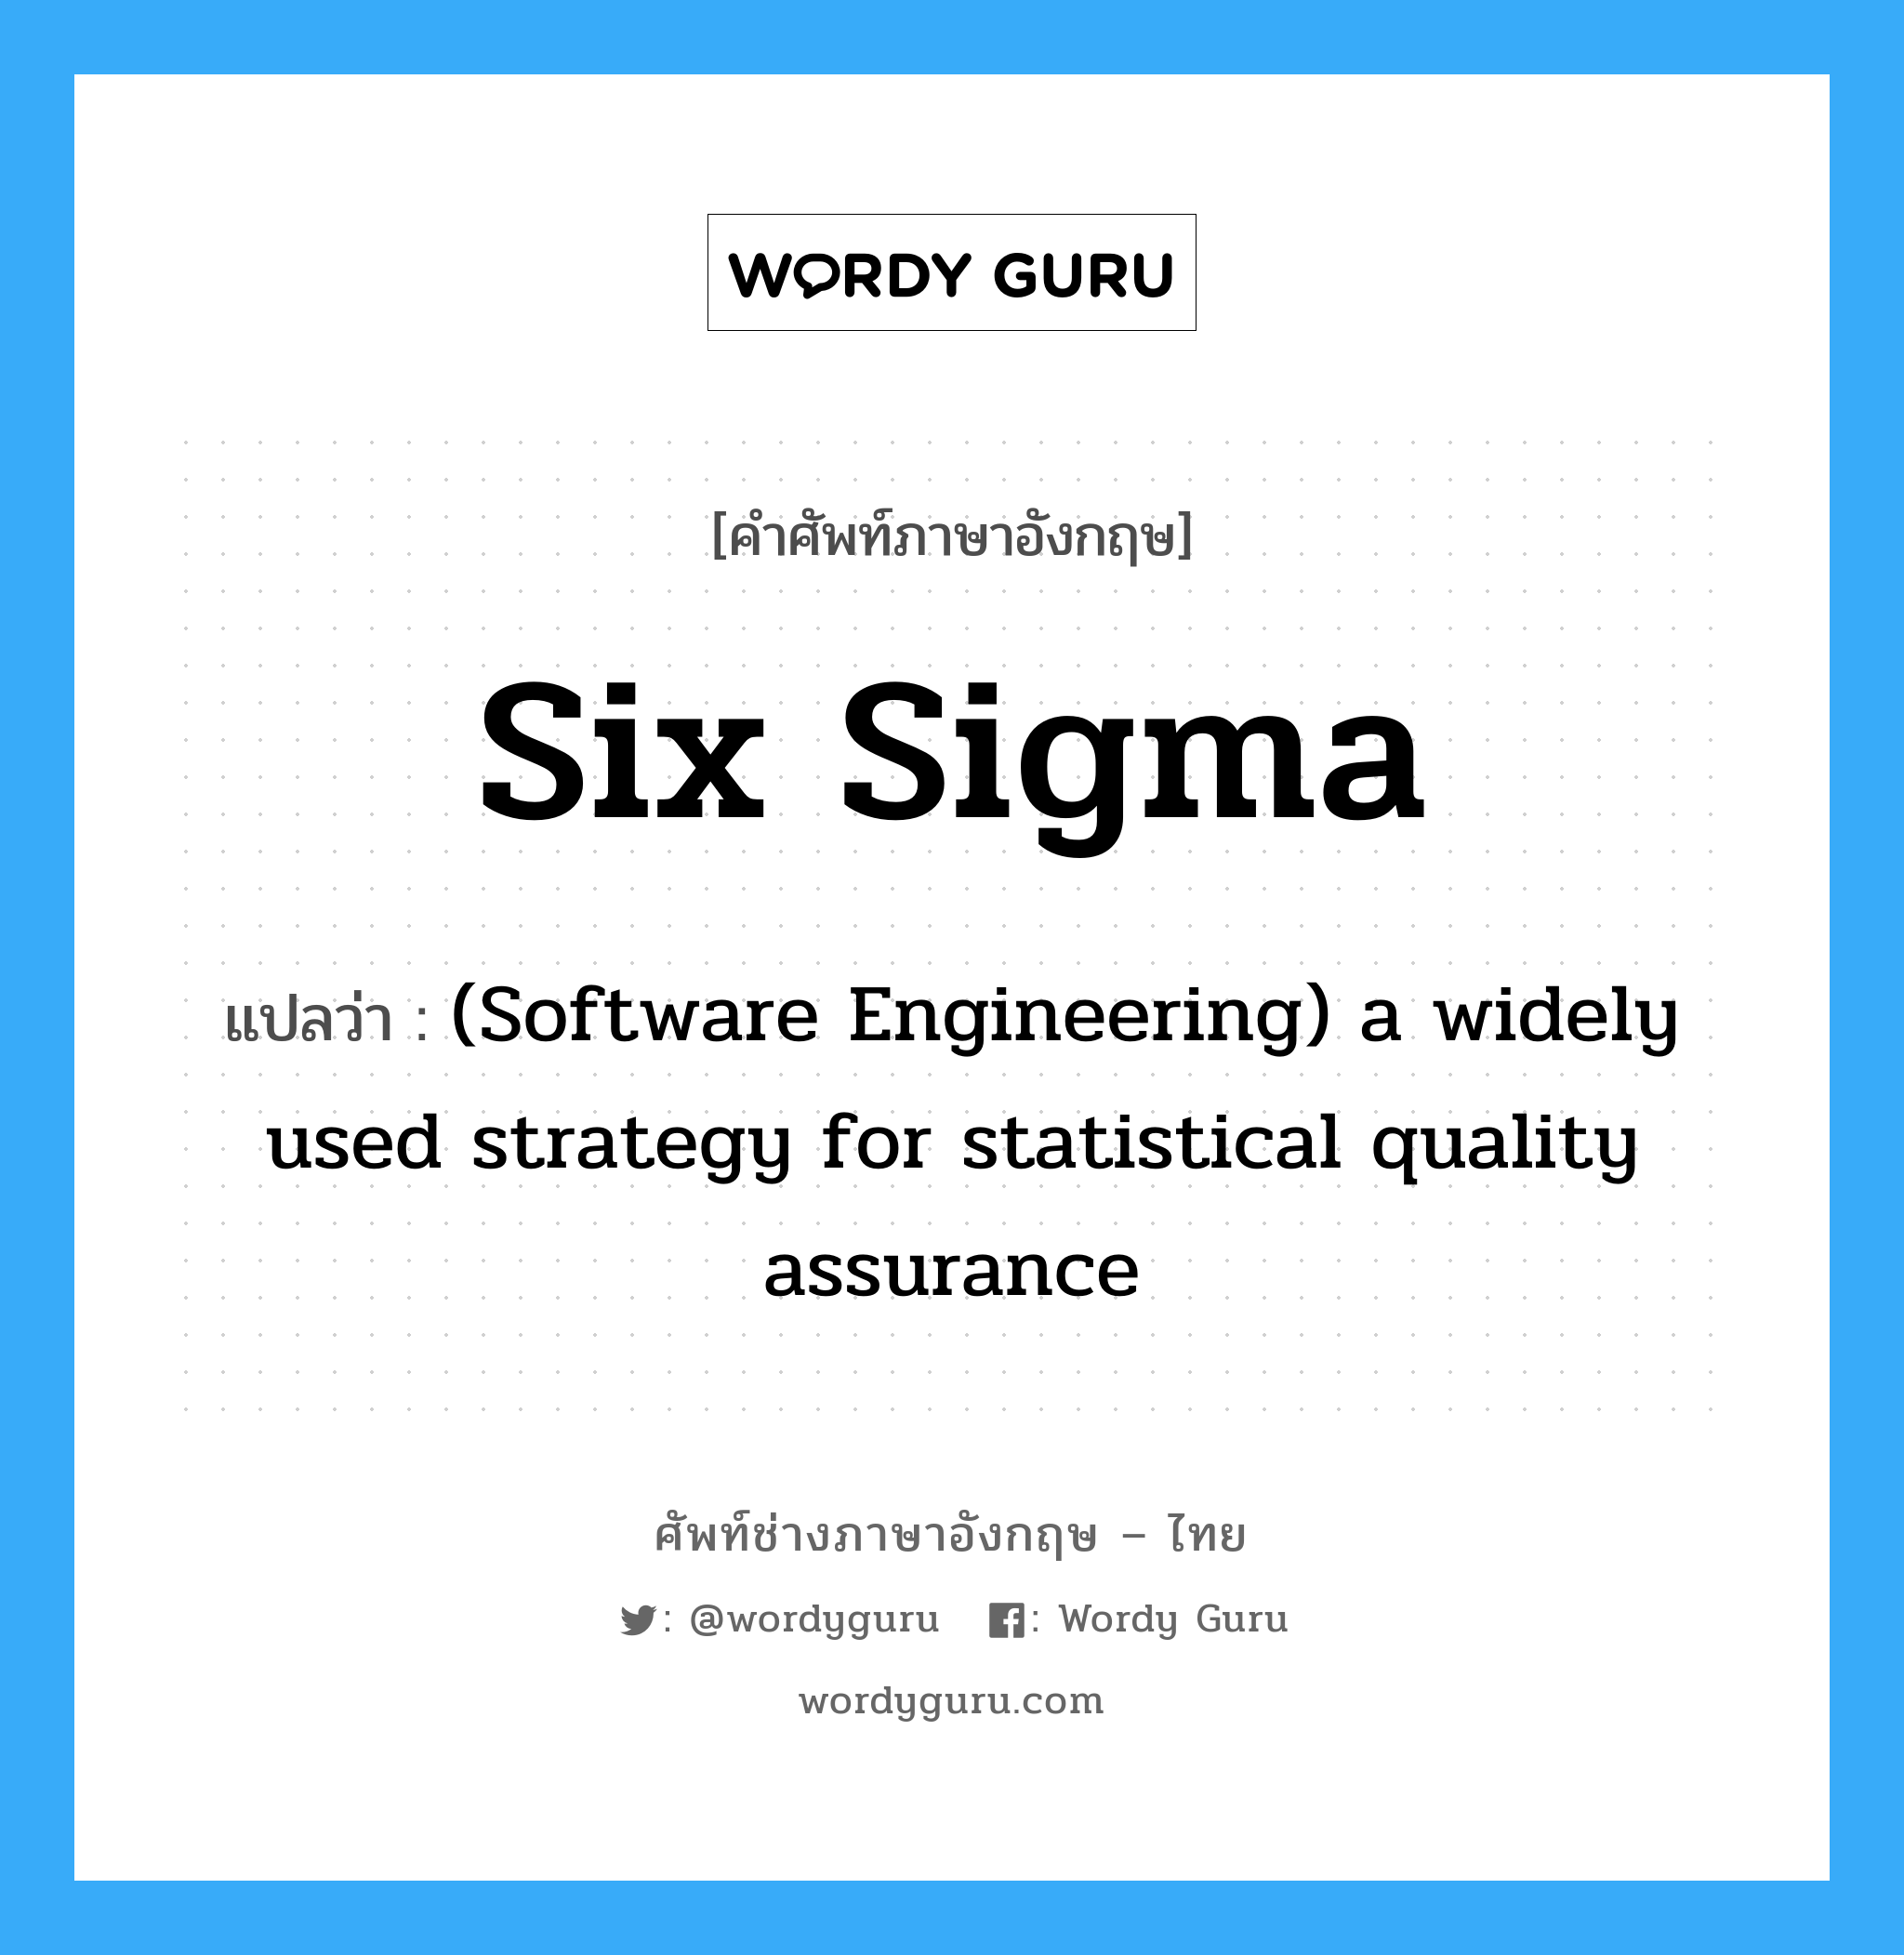 (Software Engineering) a widely used strategy for statistical quality assurance ภาษาอังกฤษ?, คำศัพท์ช่างภาษาอังกฤษ - ไทย (Software Engineering) a widely used strategy for statistical quality assurance คำศัพท์ภาษาอังกฤษ (Software Engineering) a widely used strategy for statistical quality assurance แปลว่า Six sigma